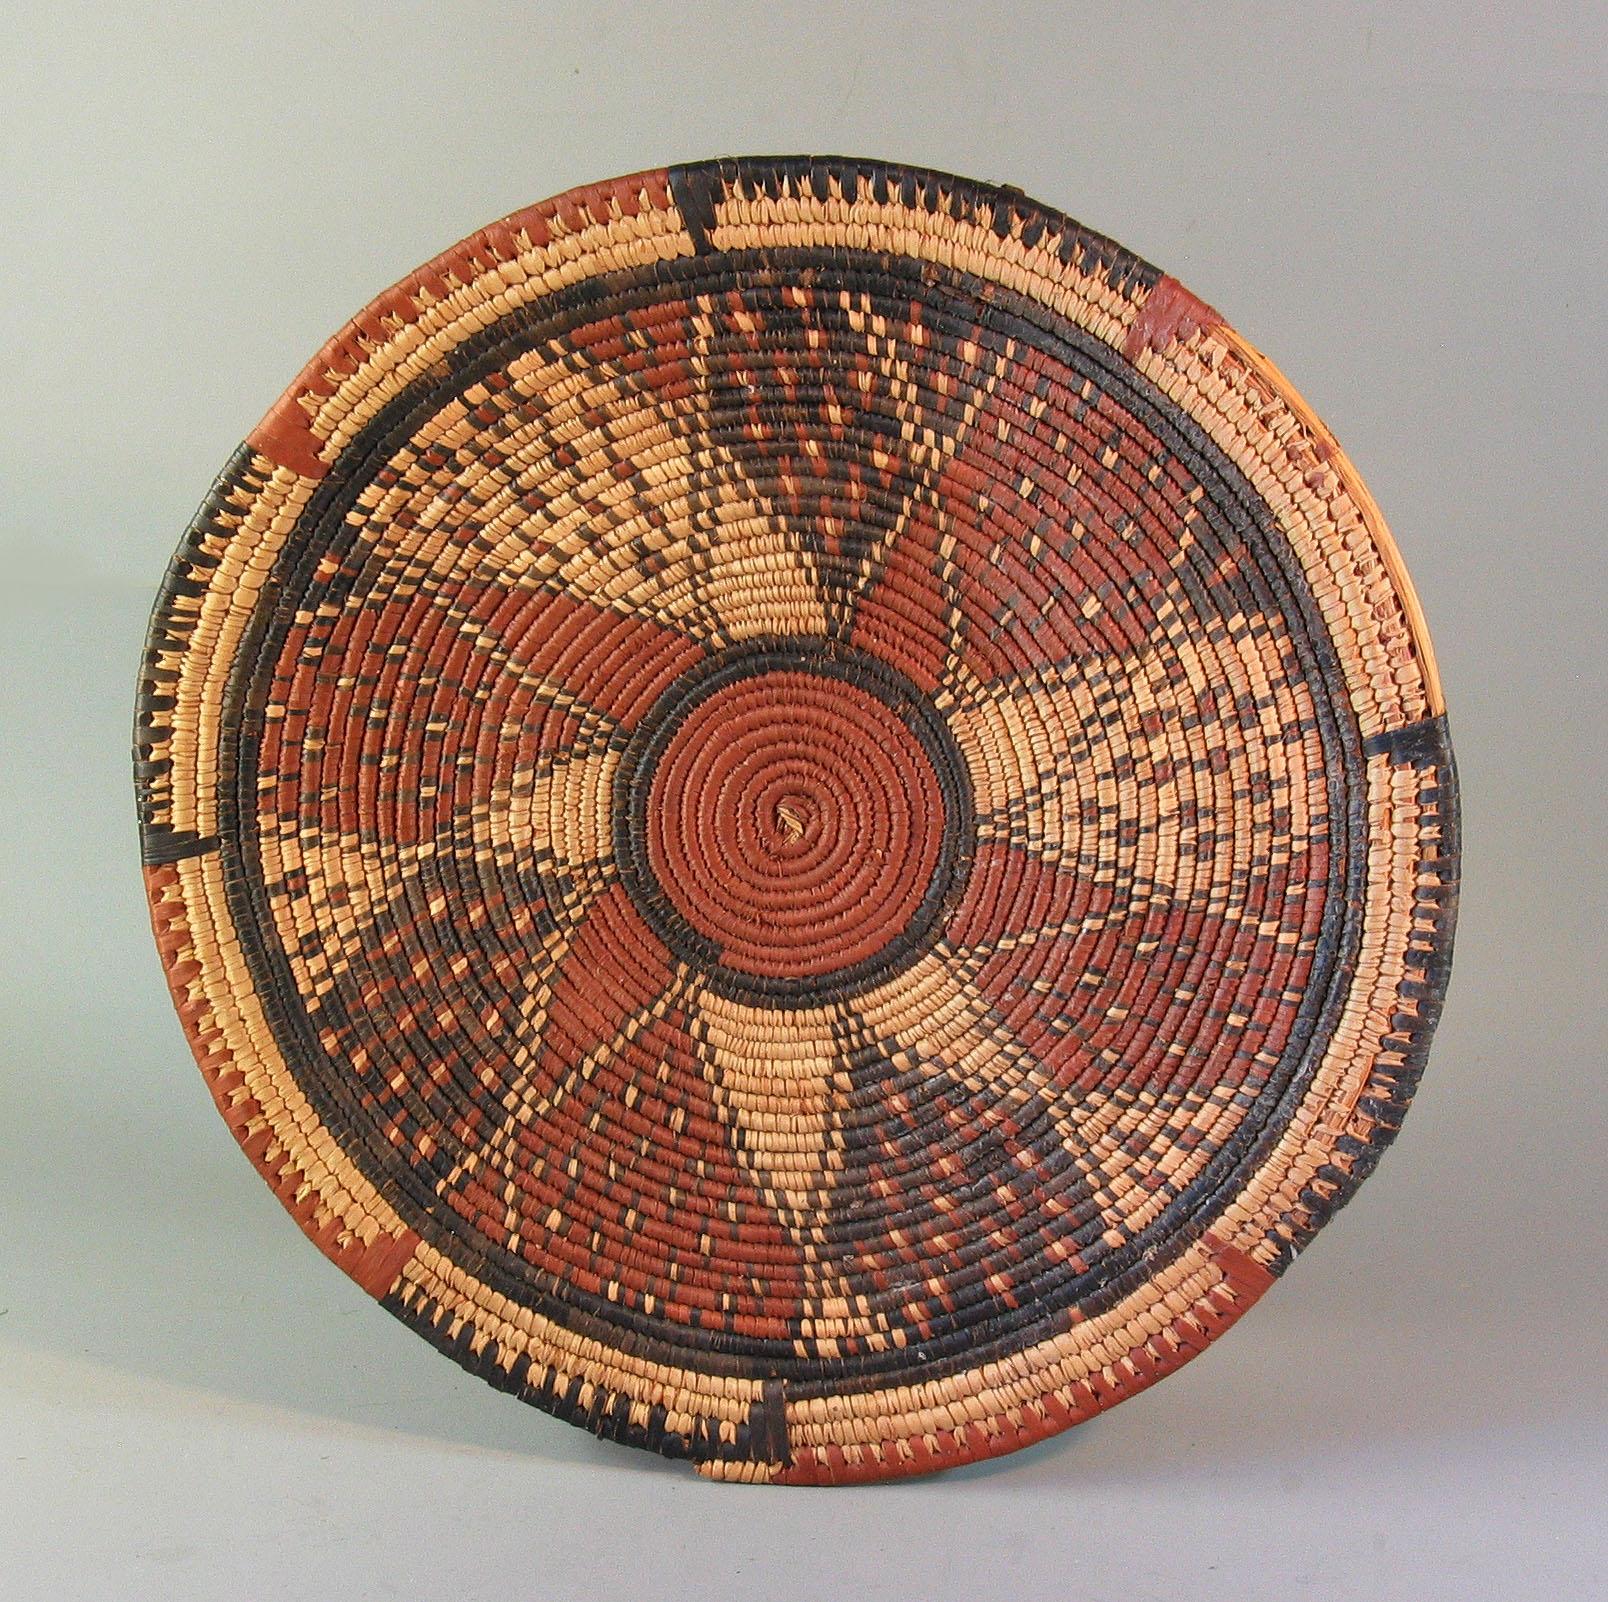 Hand-Woven Three African Coiled Basket Trays, Hausa, Nigeria, 20th Century, Tribal Art